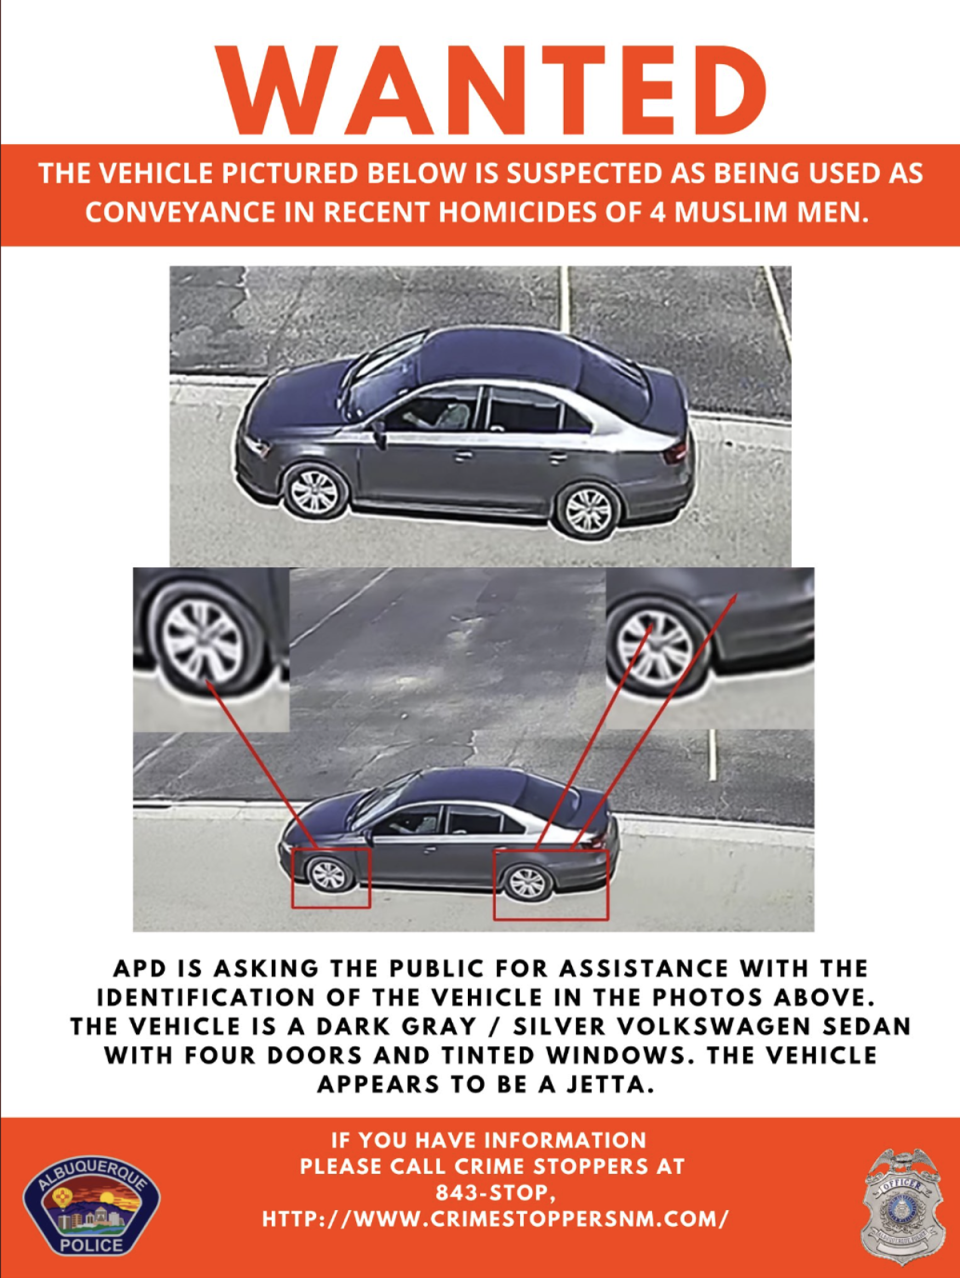 The Albuquerque Police Department asked for the public’s help in locating a Volkswagen sedan linked to the killings (Albuquerque Police Department)